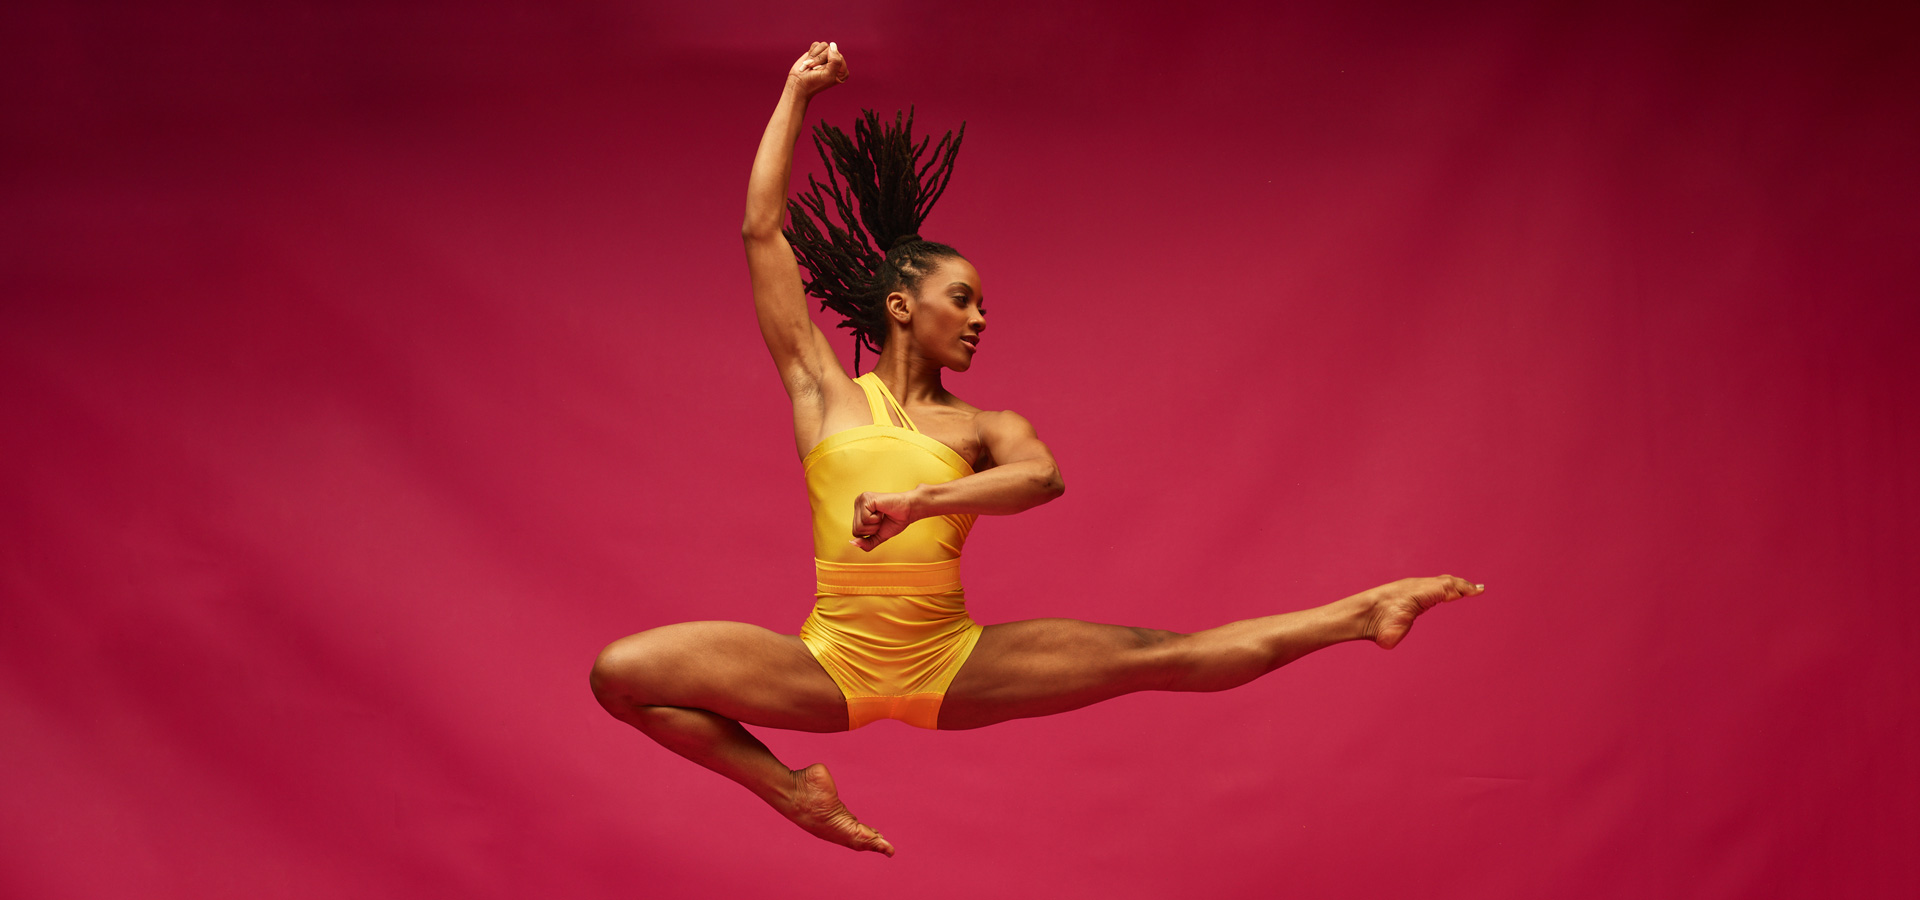 Dancer from the the Alvin Ailey American Dance Theater poses against a red background in a powerful jump with her arms and legs extended mid-air, wearing a vibrant yellow leotard.